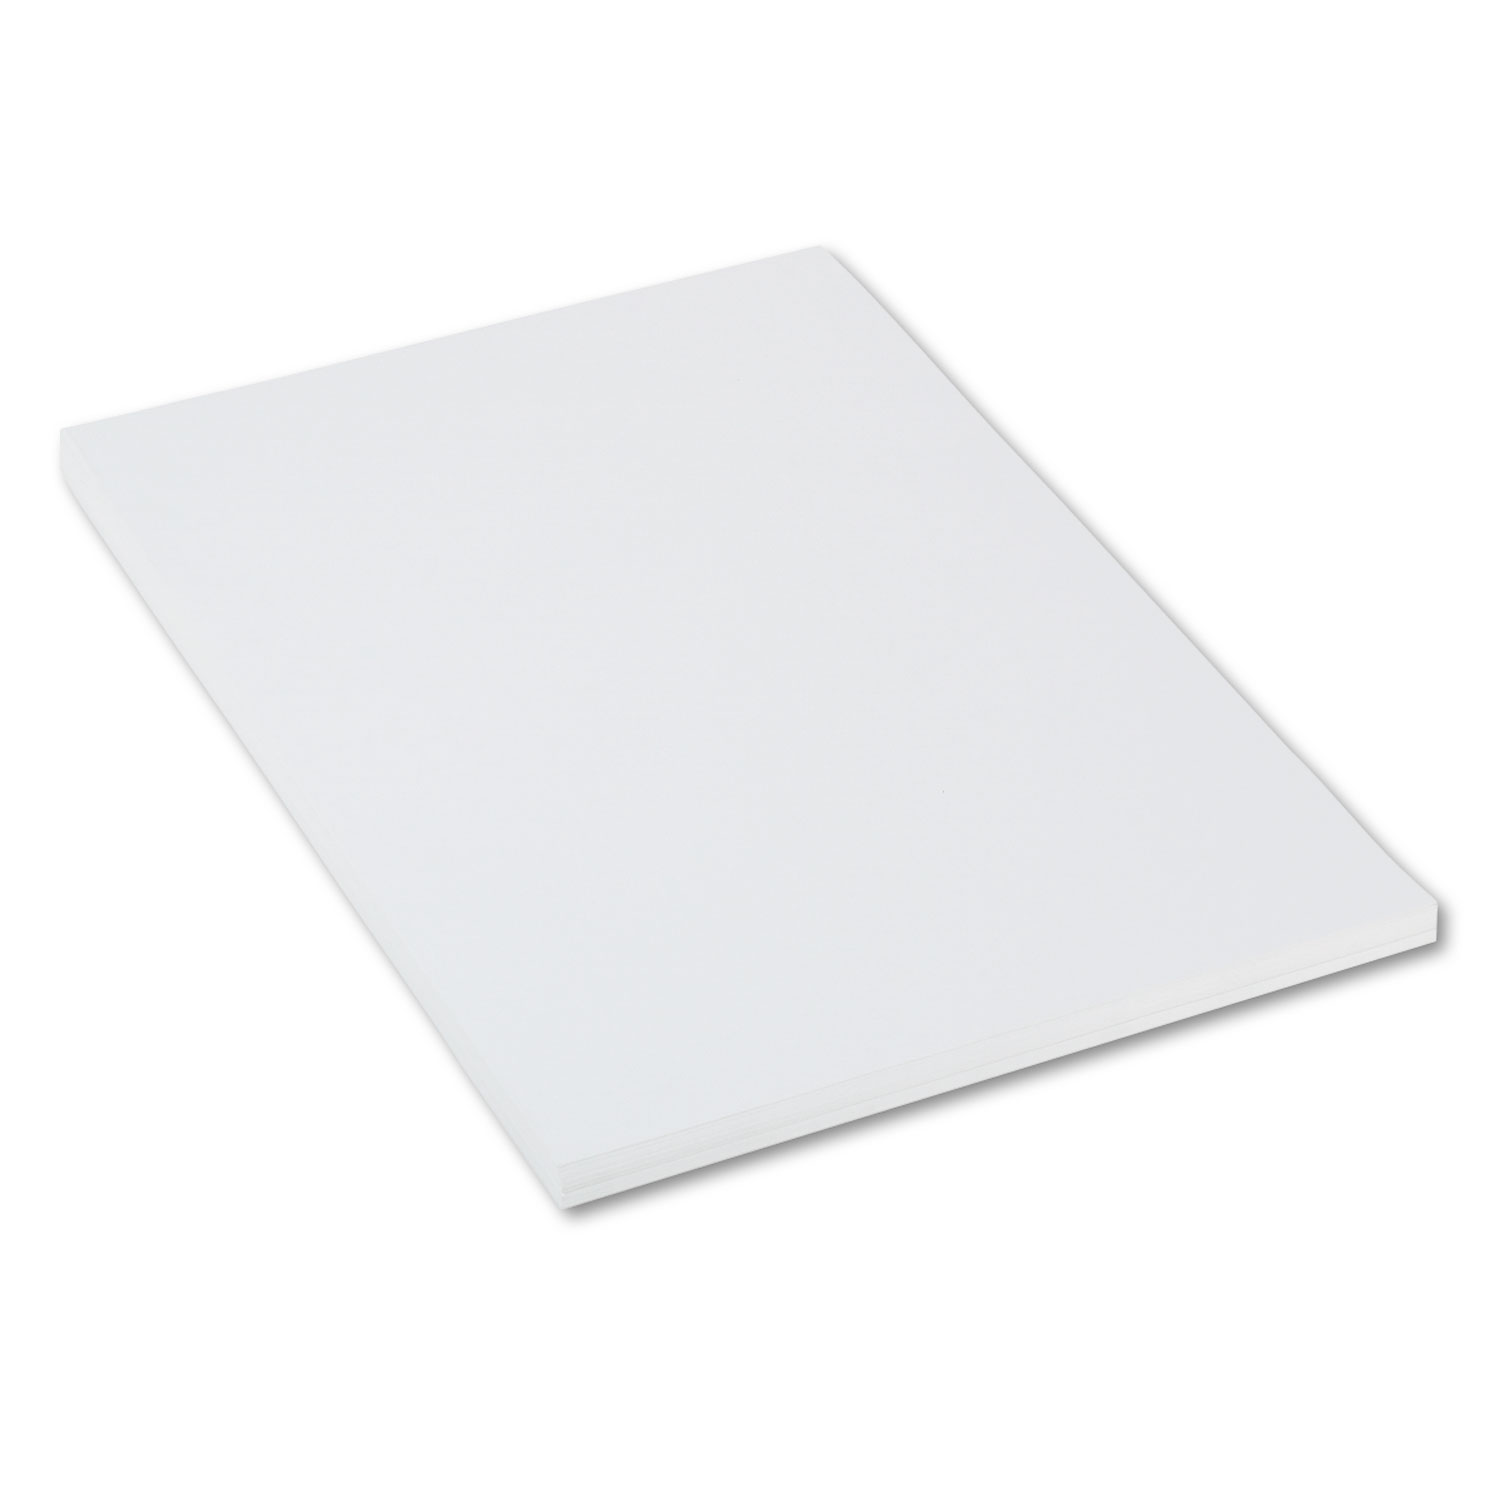  Pacon 5226 Heavyweight Tagboard, 36 x 24, White, 100/Pack (PAC5226) 